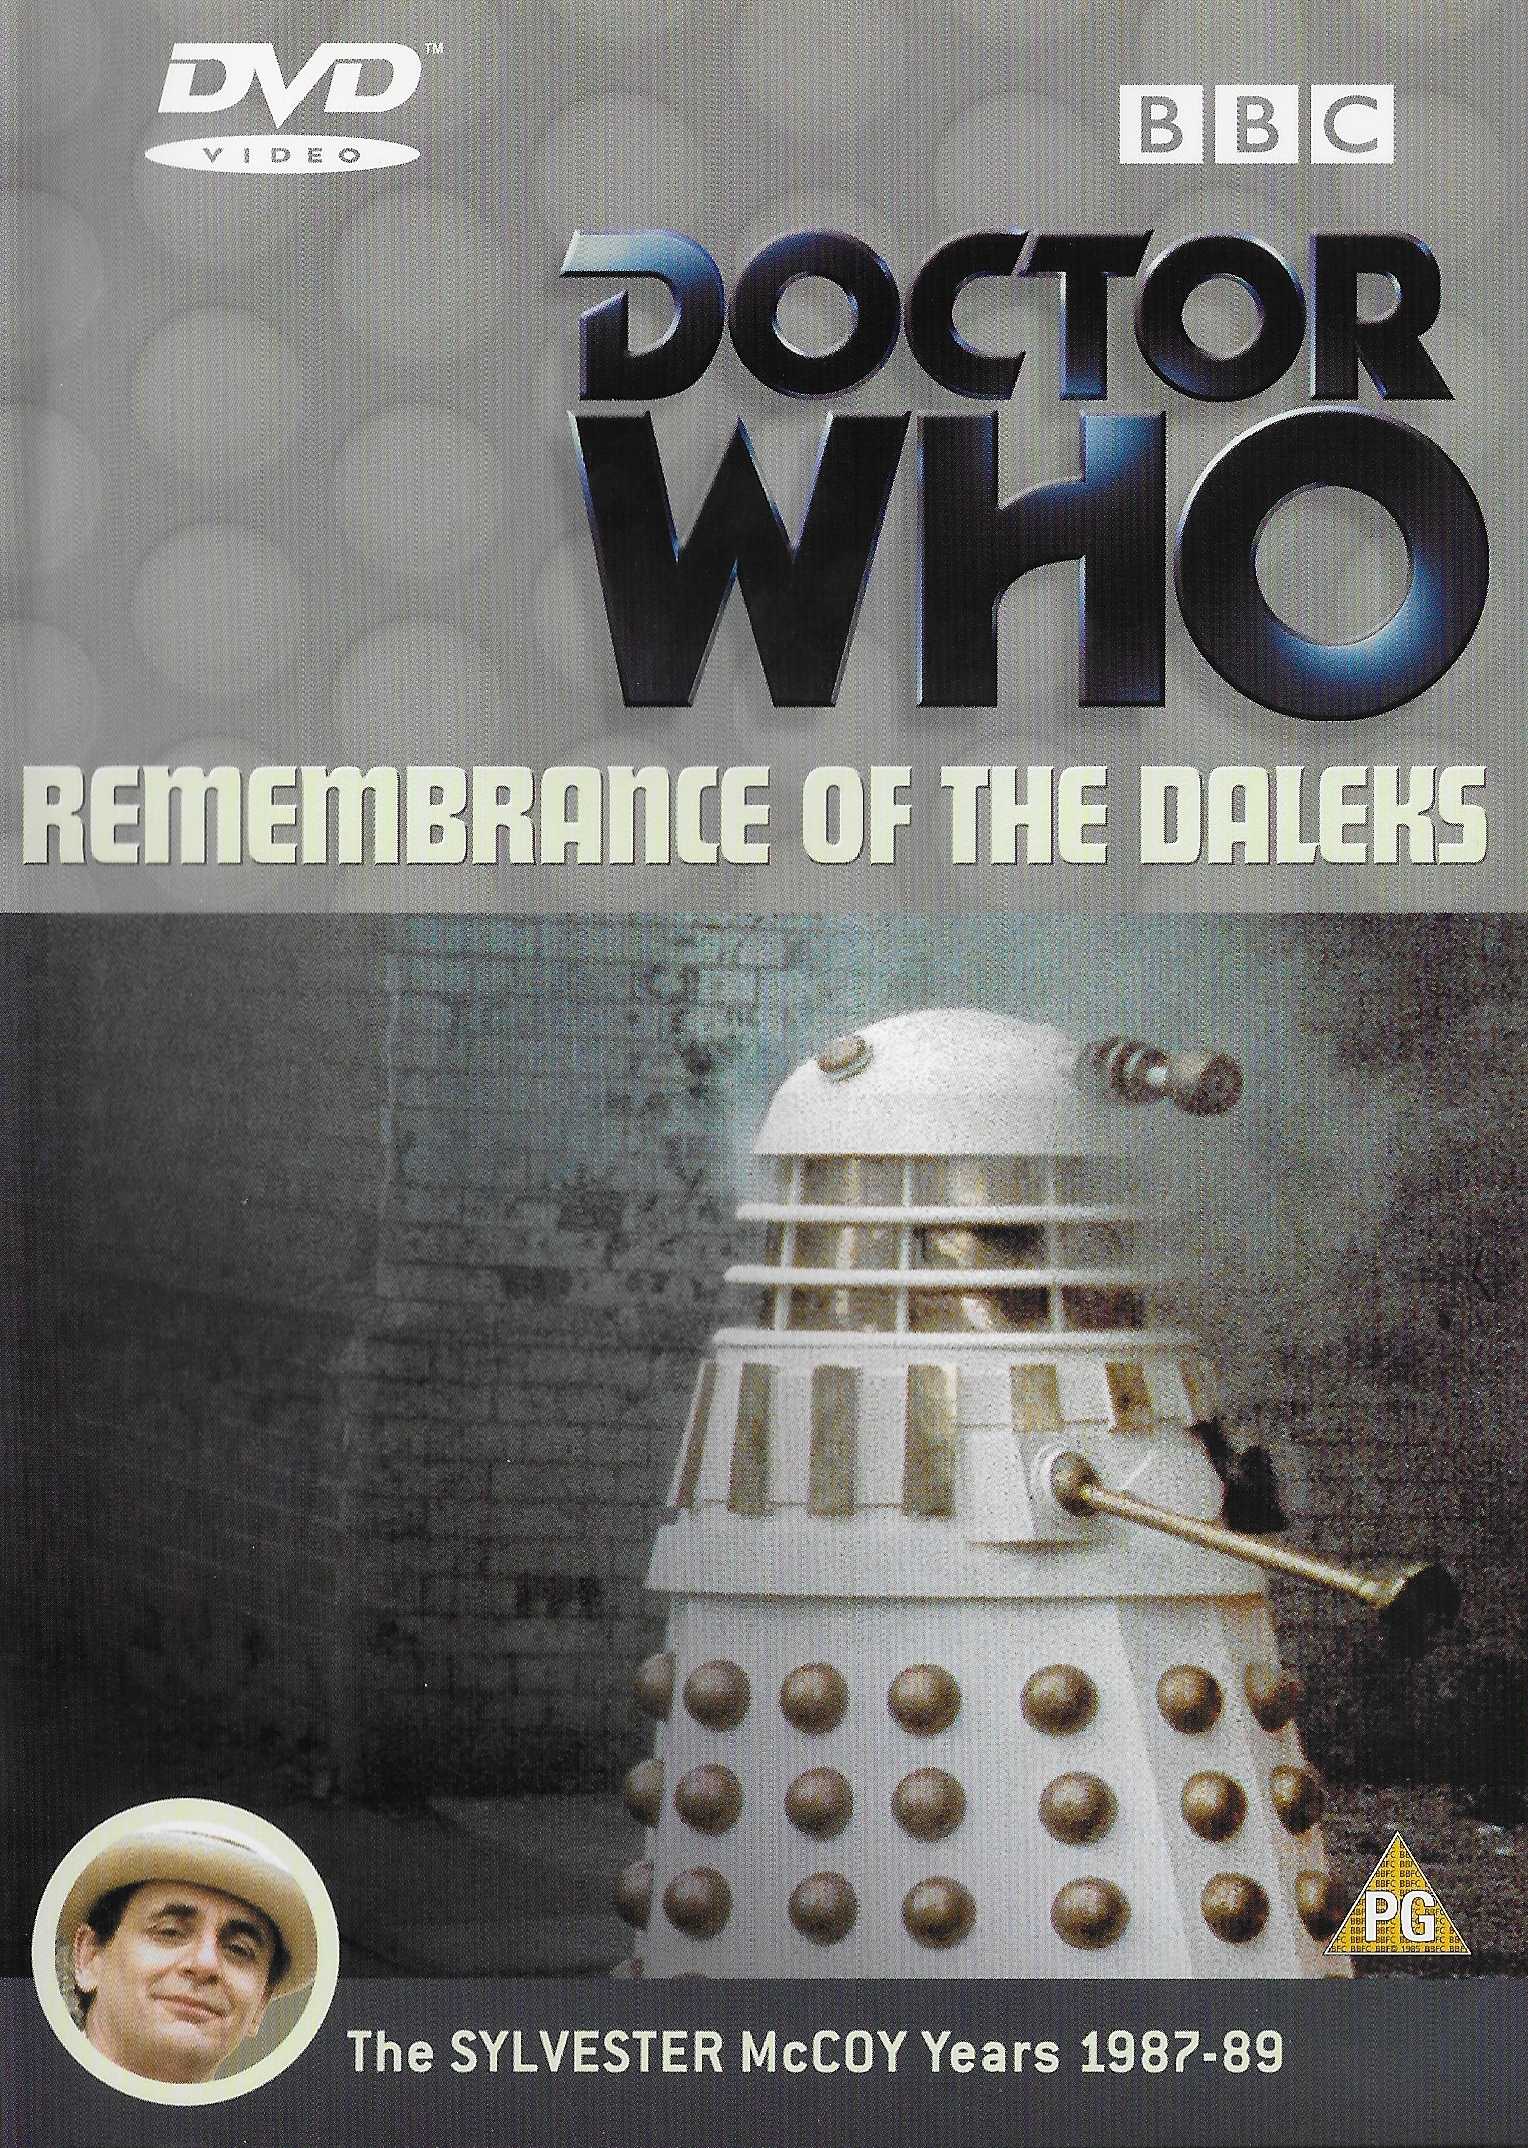 Picture of BBCDVD 1040 Doctor Who - Remembrance of the Daleks by artist Ben Aaronovitch from the BBC dvds - Records and Tapes library